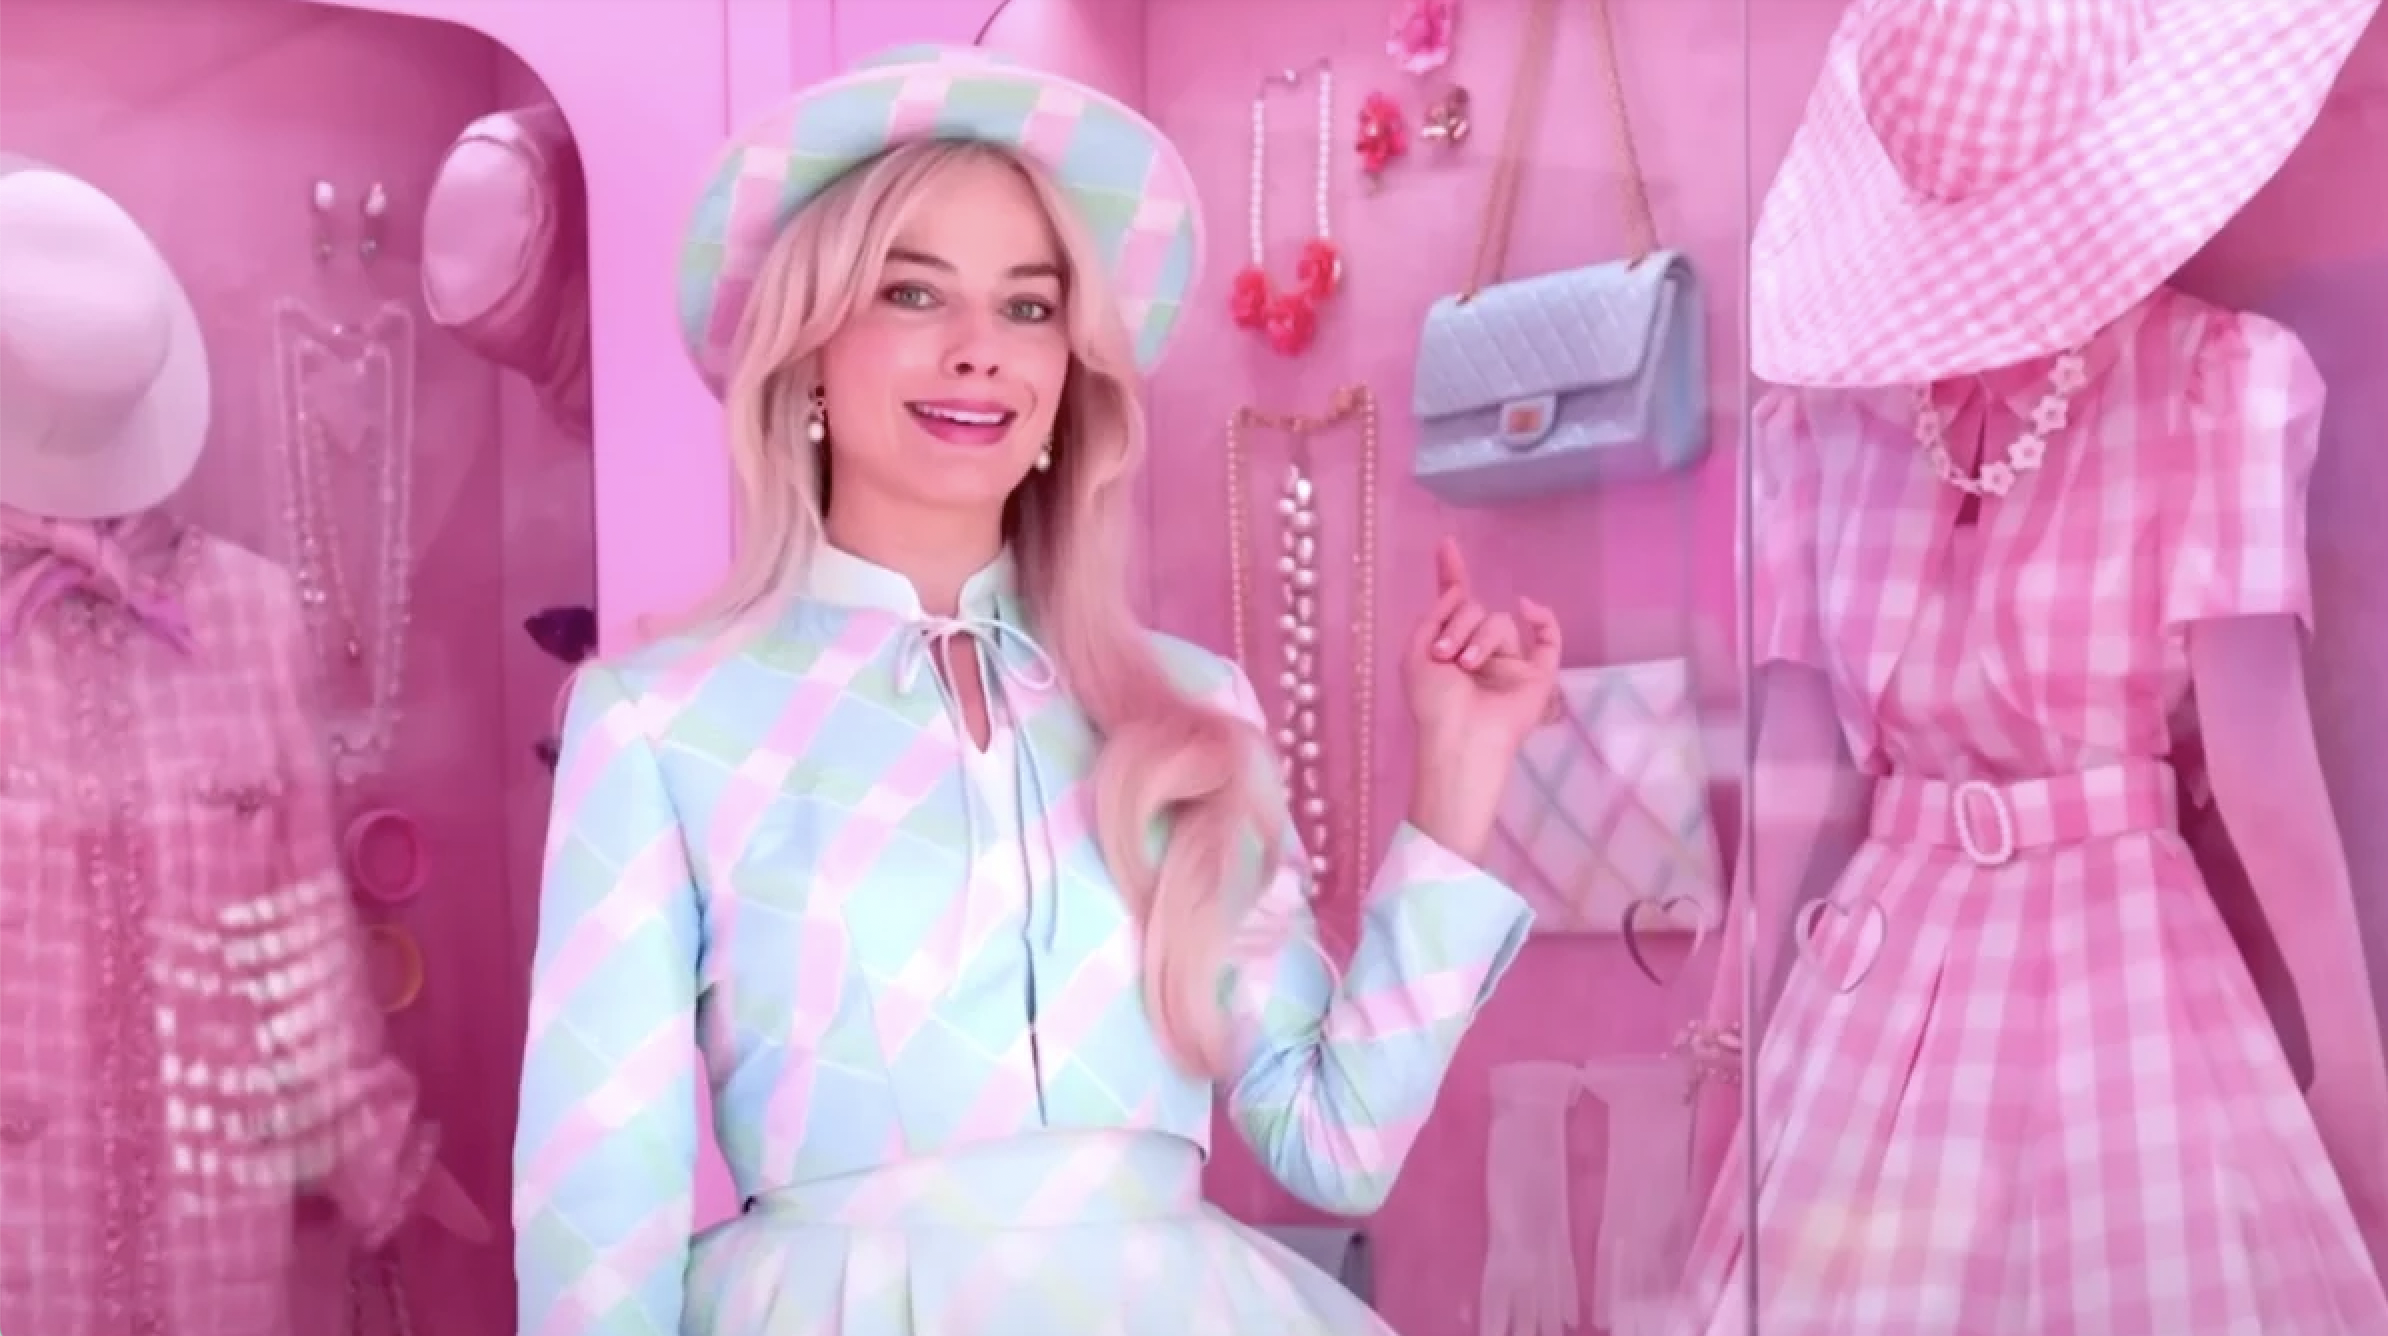 See All the Chanel Looks in the Barbie Movie